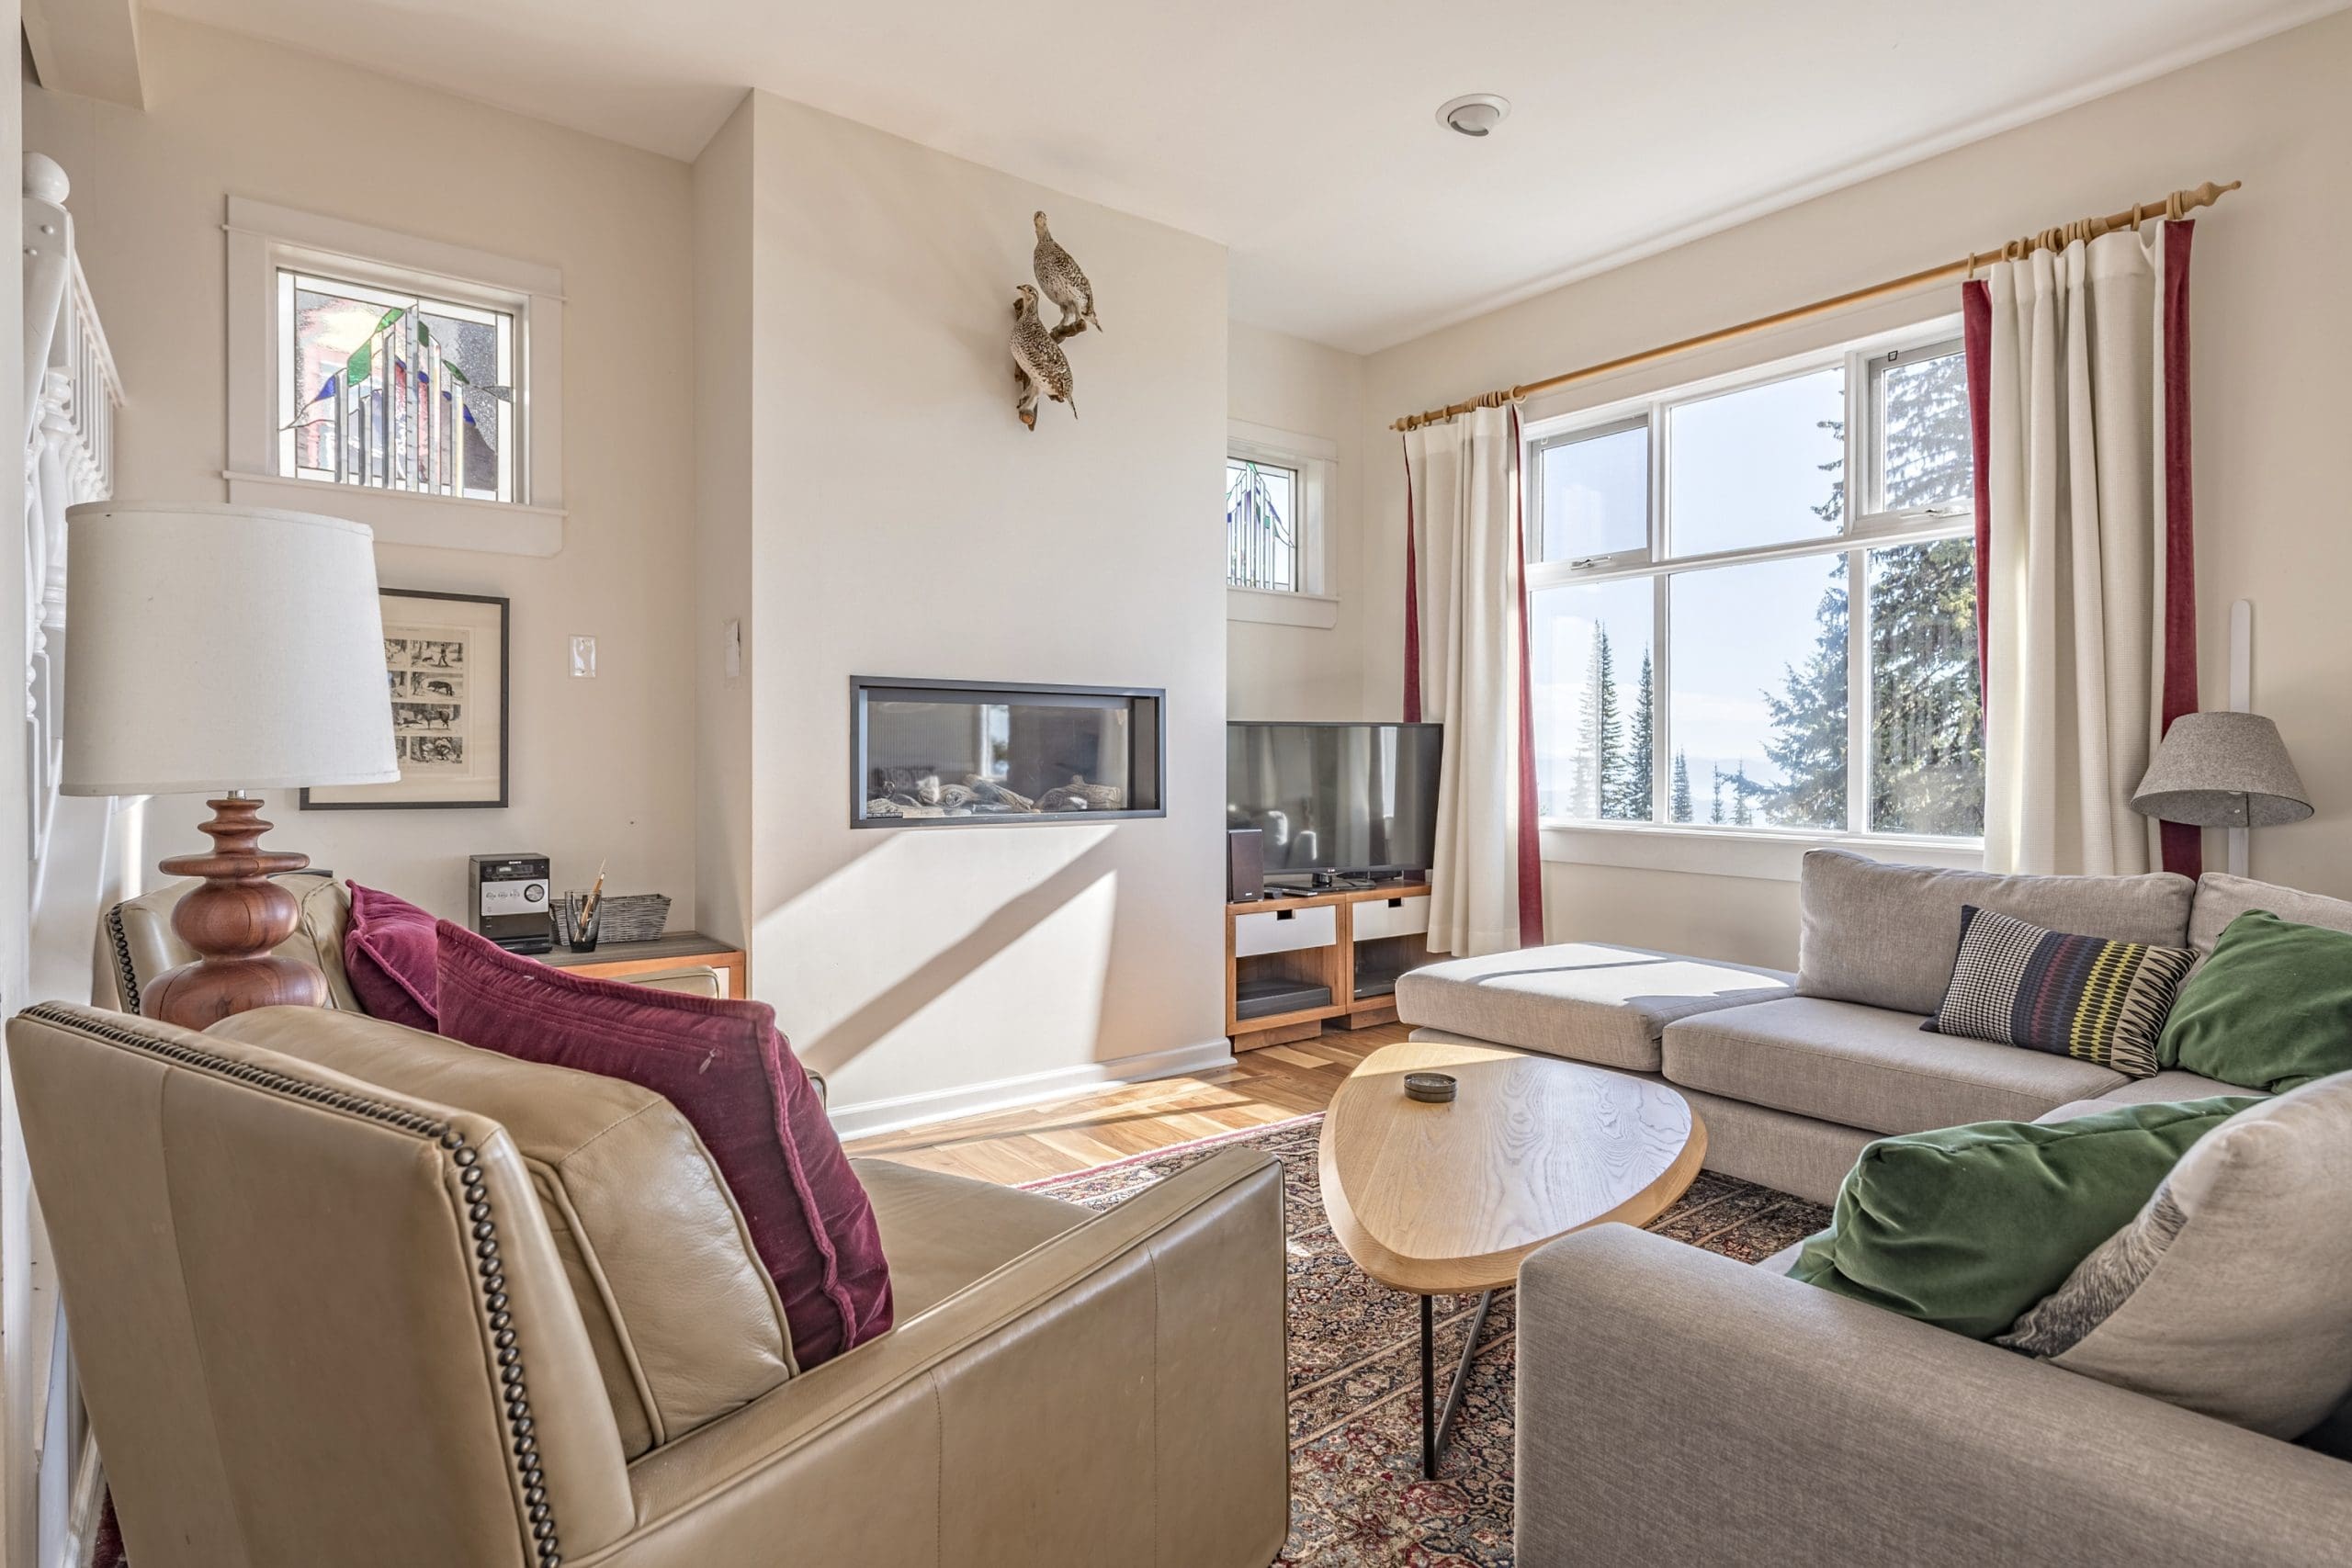 This family friendly home on the Knoll is pet-friendly with incredible mountain views of the Monashees. Ski out right from your yard to the trails/runs and relax in your private hot tub on the deck. Also features private laundry, and multiple living spaces for everyone to spread out.